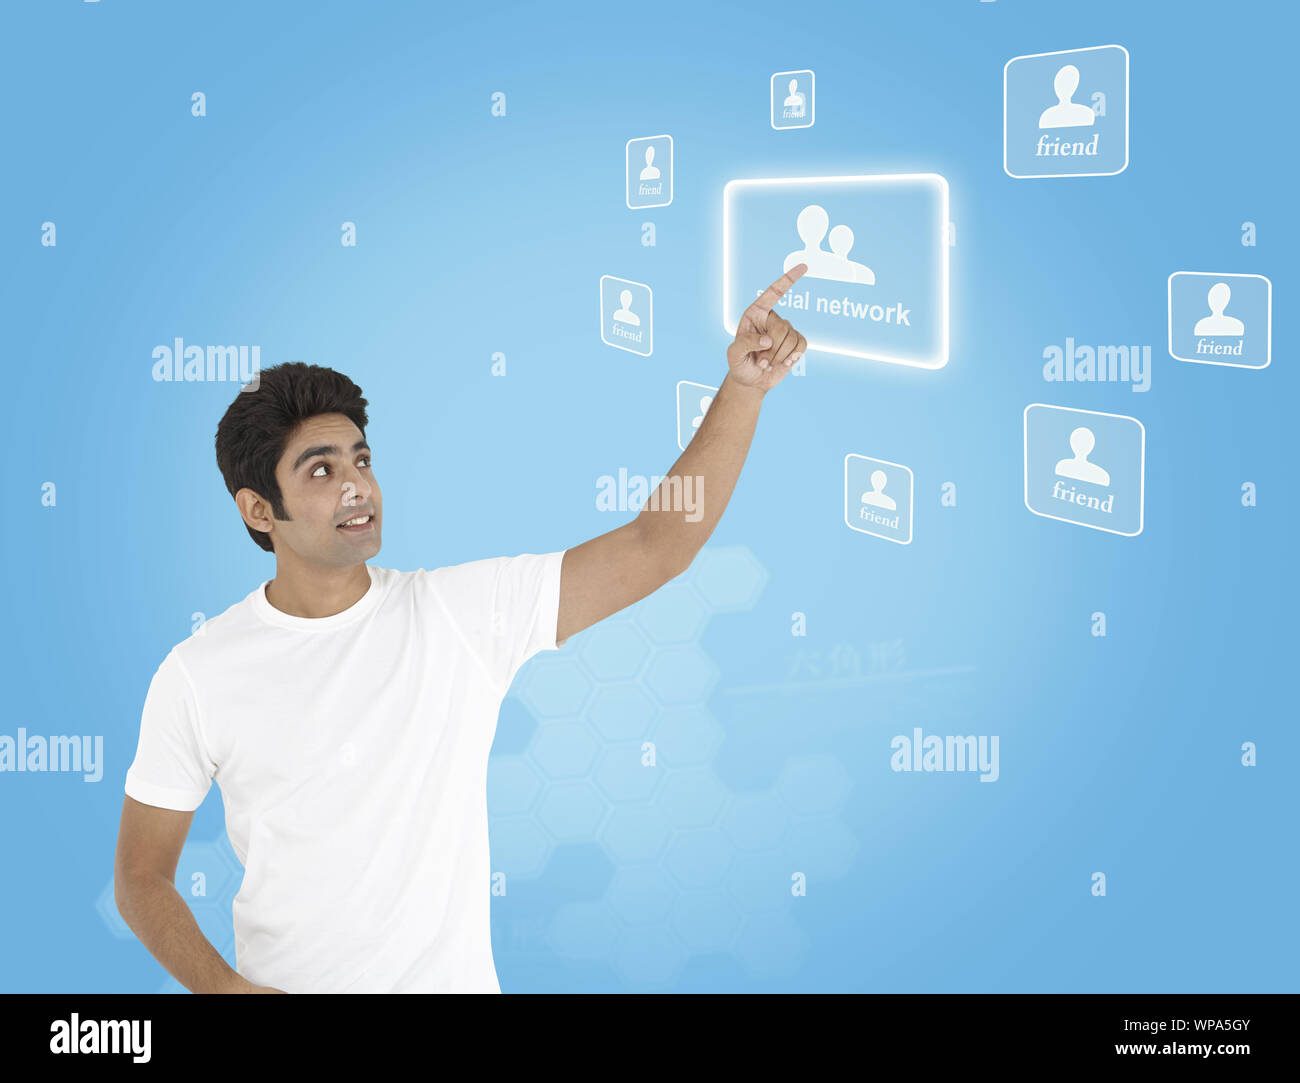 Young man using a touch screen and smiling Stock Photo